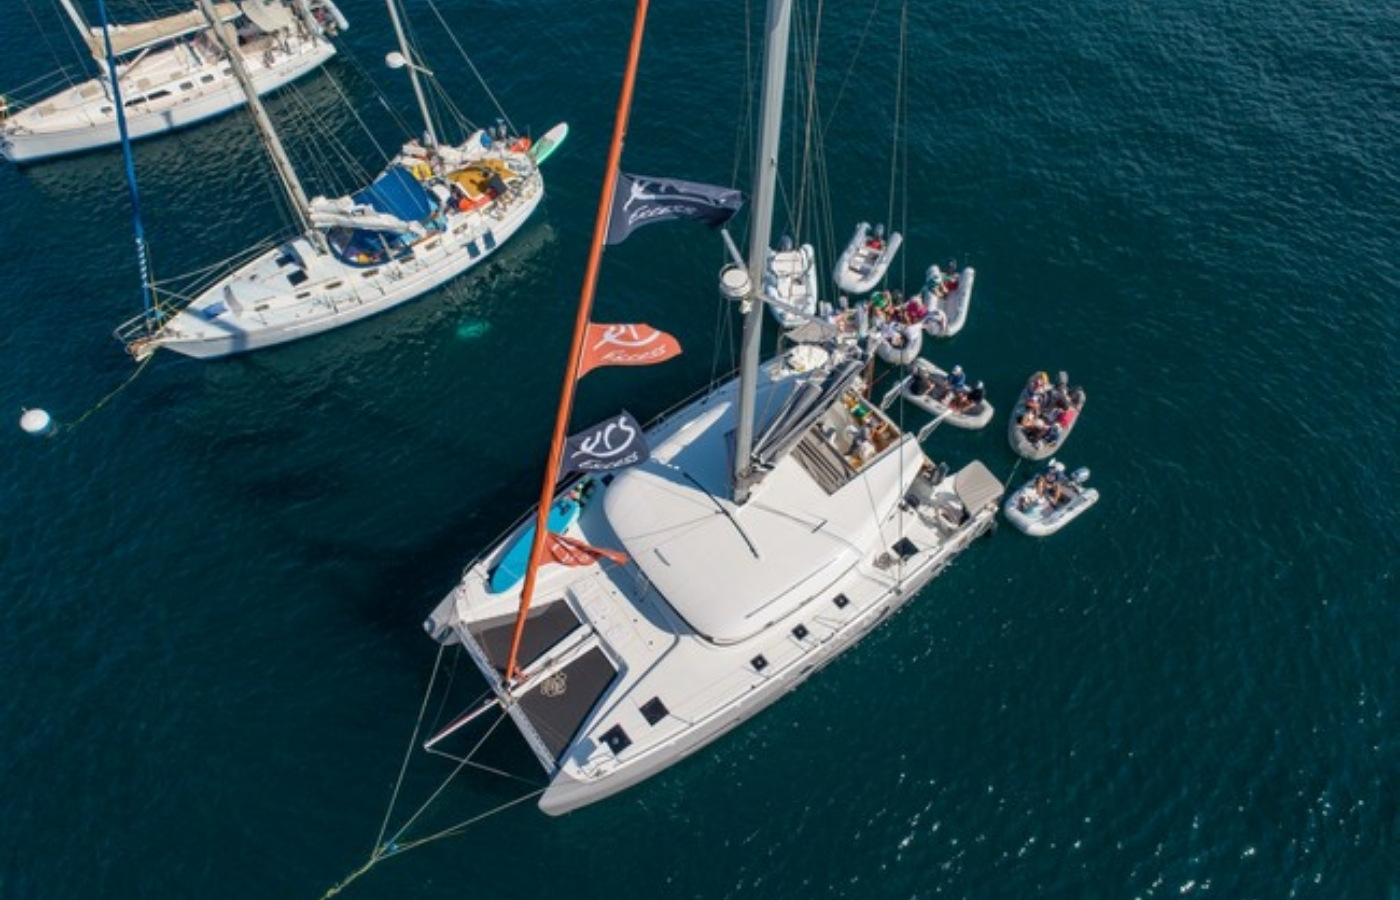 Featured Sailing School: Blue Pacific Yachting [In the News]